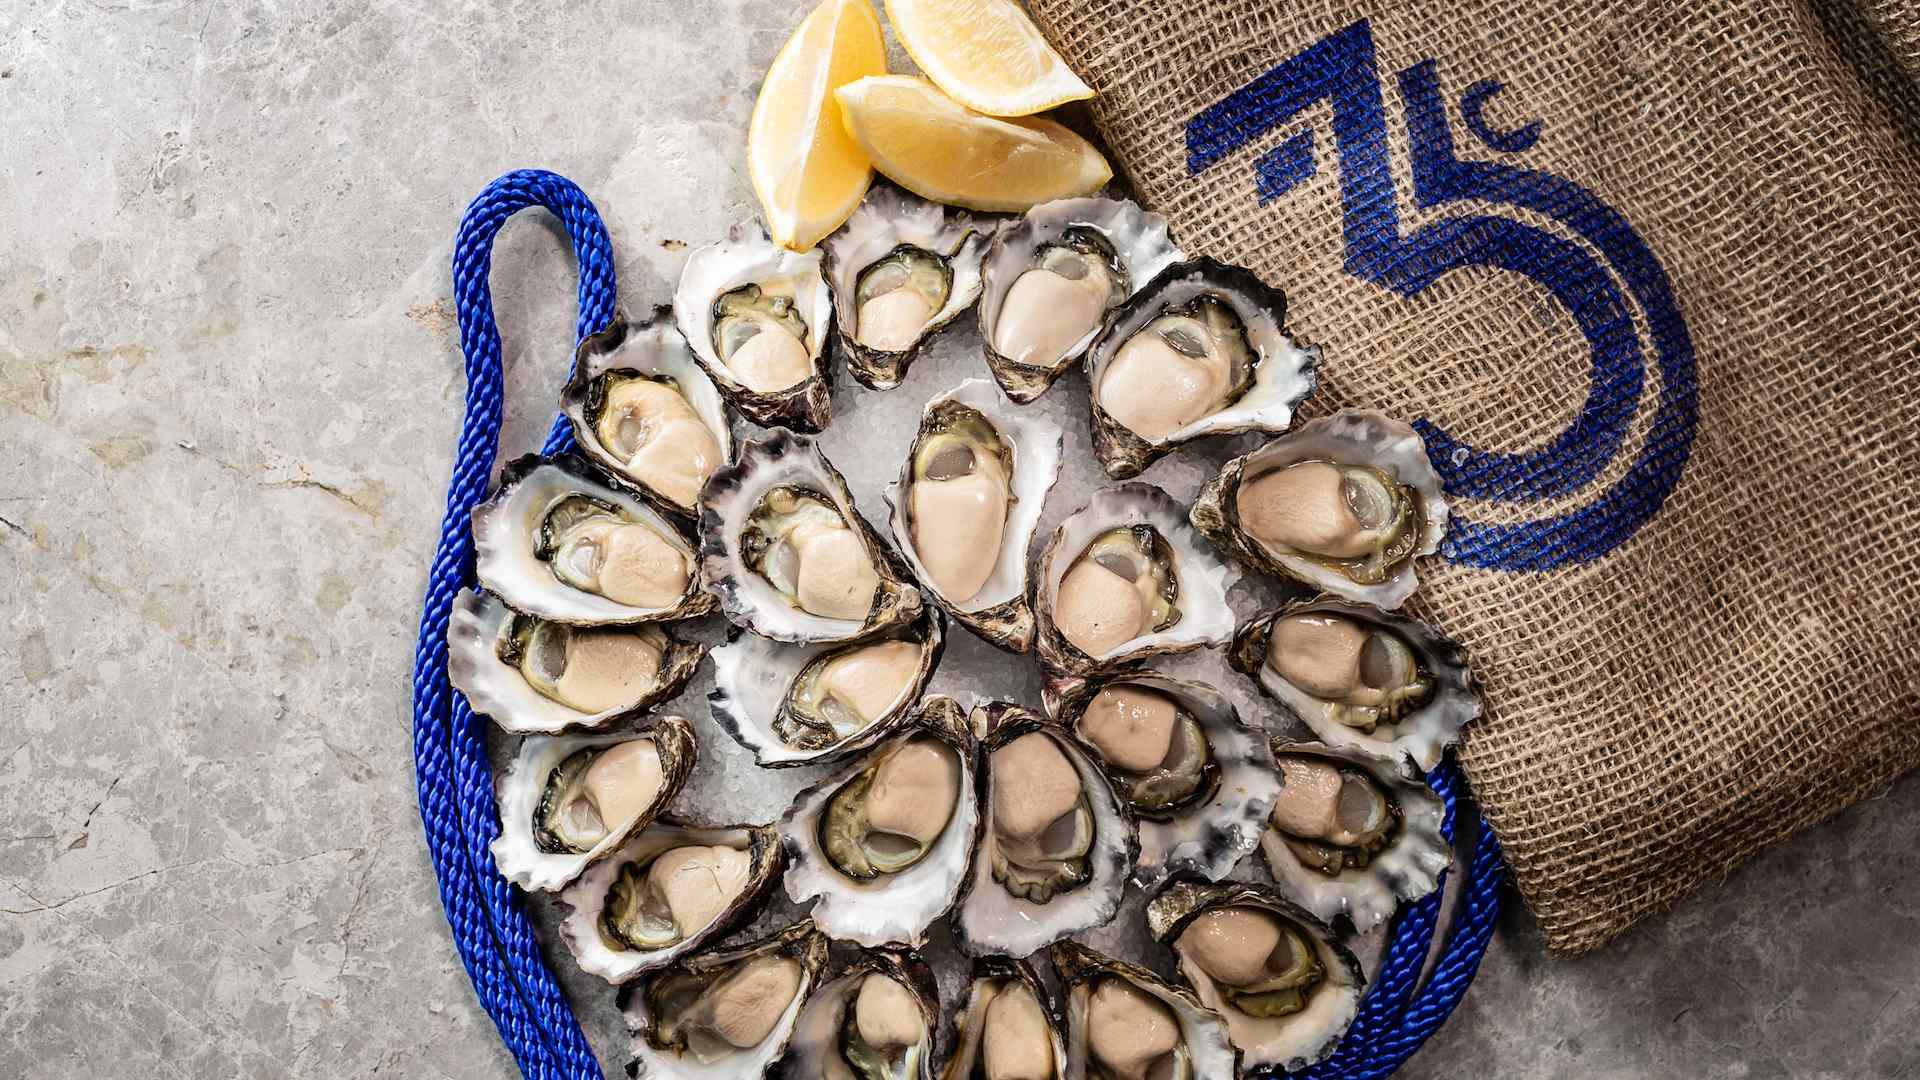 East 33 Is Brisbane's New Home-Delivery Service Dropping A-Class Oysters to Your Doorstep